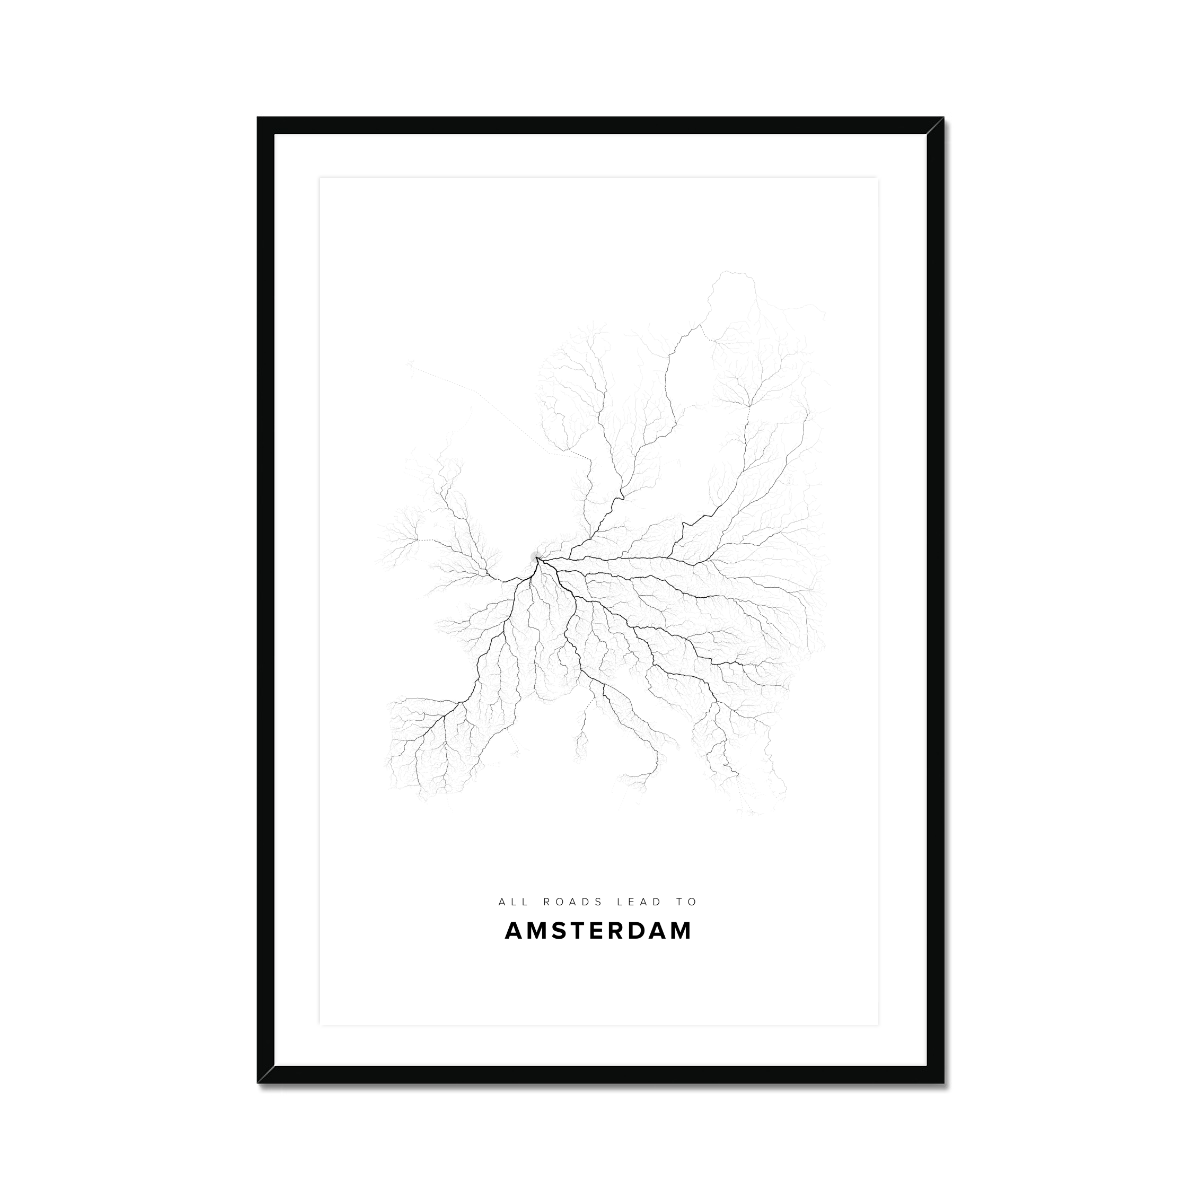 All roads lead to Amsterdam (Netherlands) Fine Art Map Print